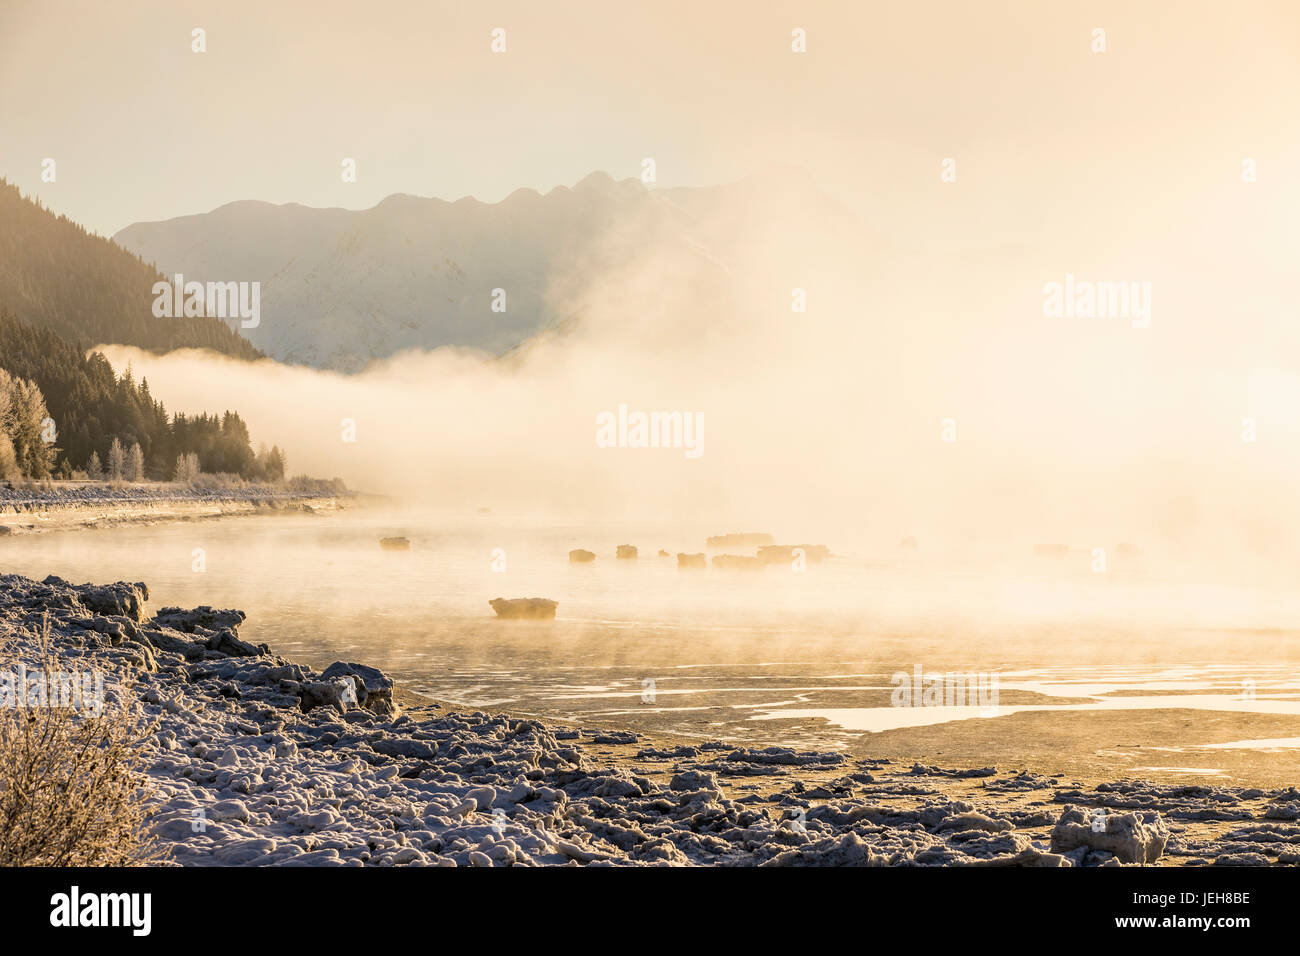 Low Altitude Fog Is Cast In Warm Sunset Light Along Turnagain Arm And The Seward Highway In Winter, Sea Ice Covering The Ocean In The Foreground, T... Stock Photo